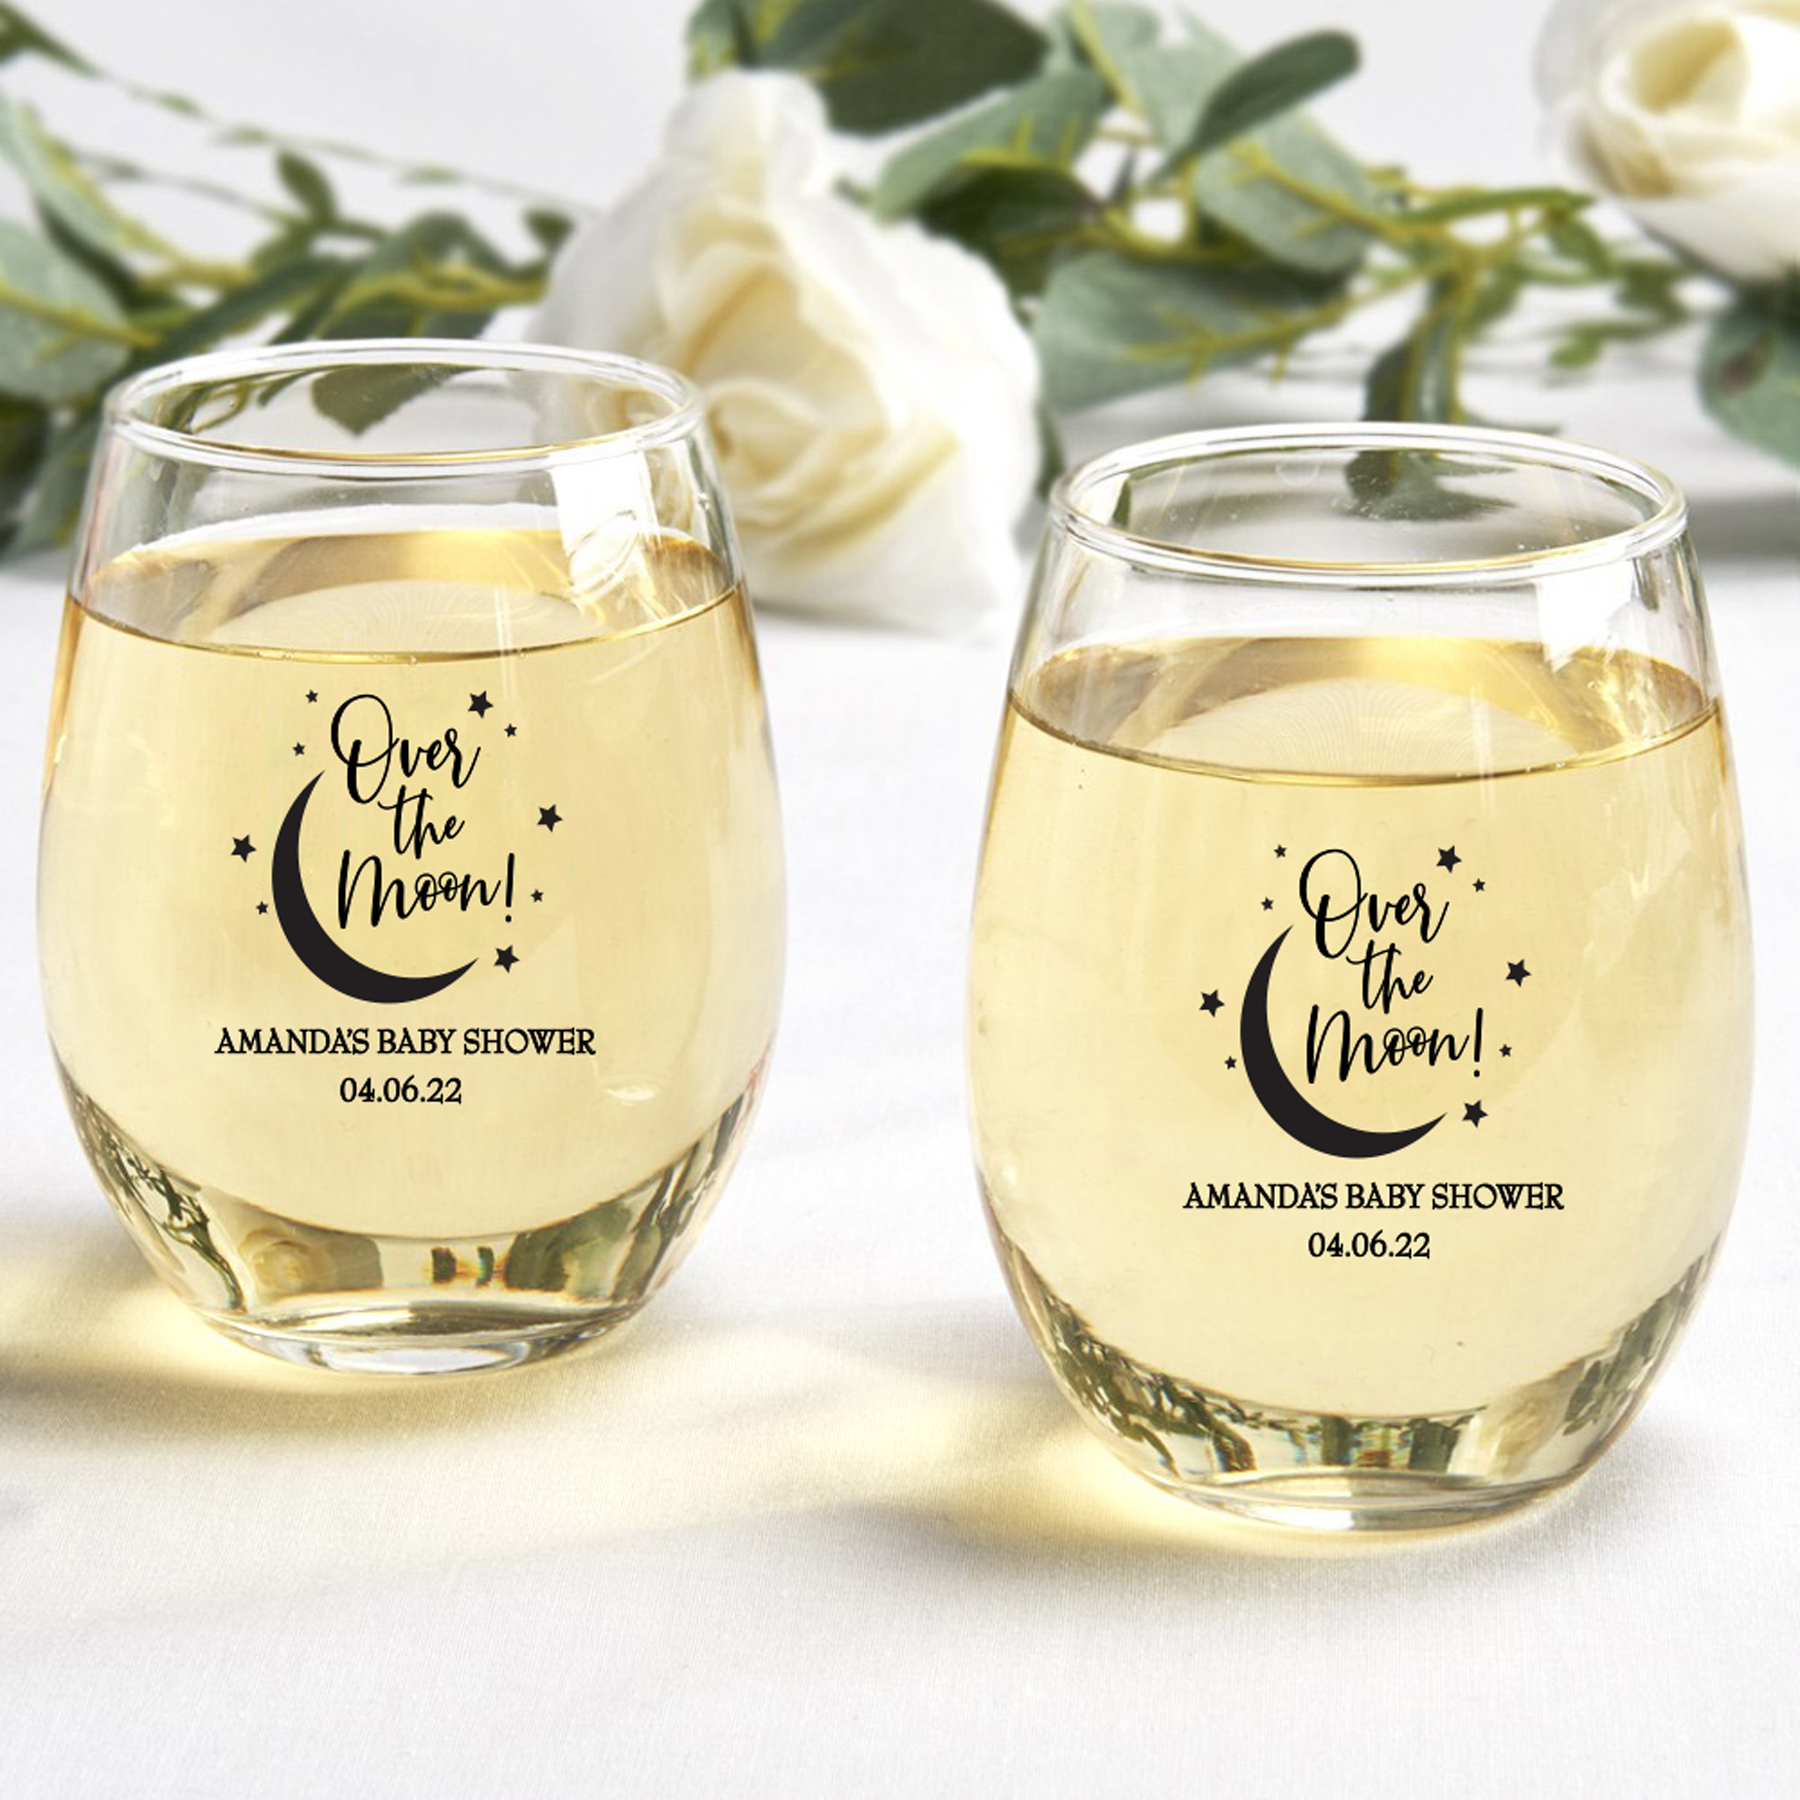 Custom Wine glass custom gifts custom wine glasses bridal party gifts wine glass bridesmaid proposal bridesmaid gifts custom cups